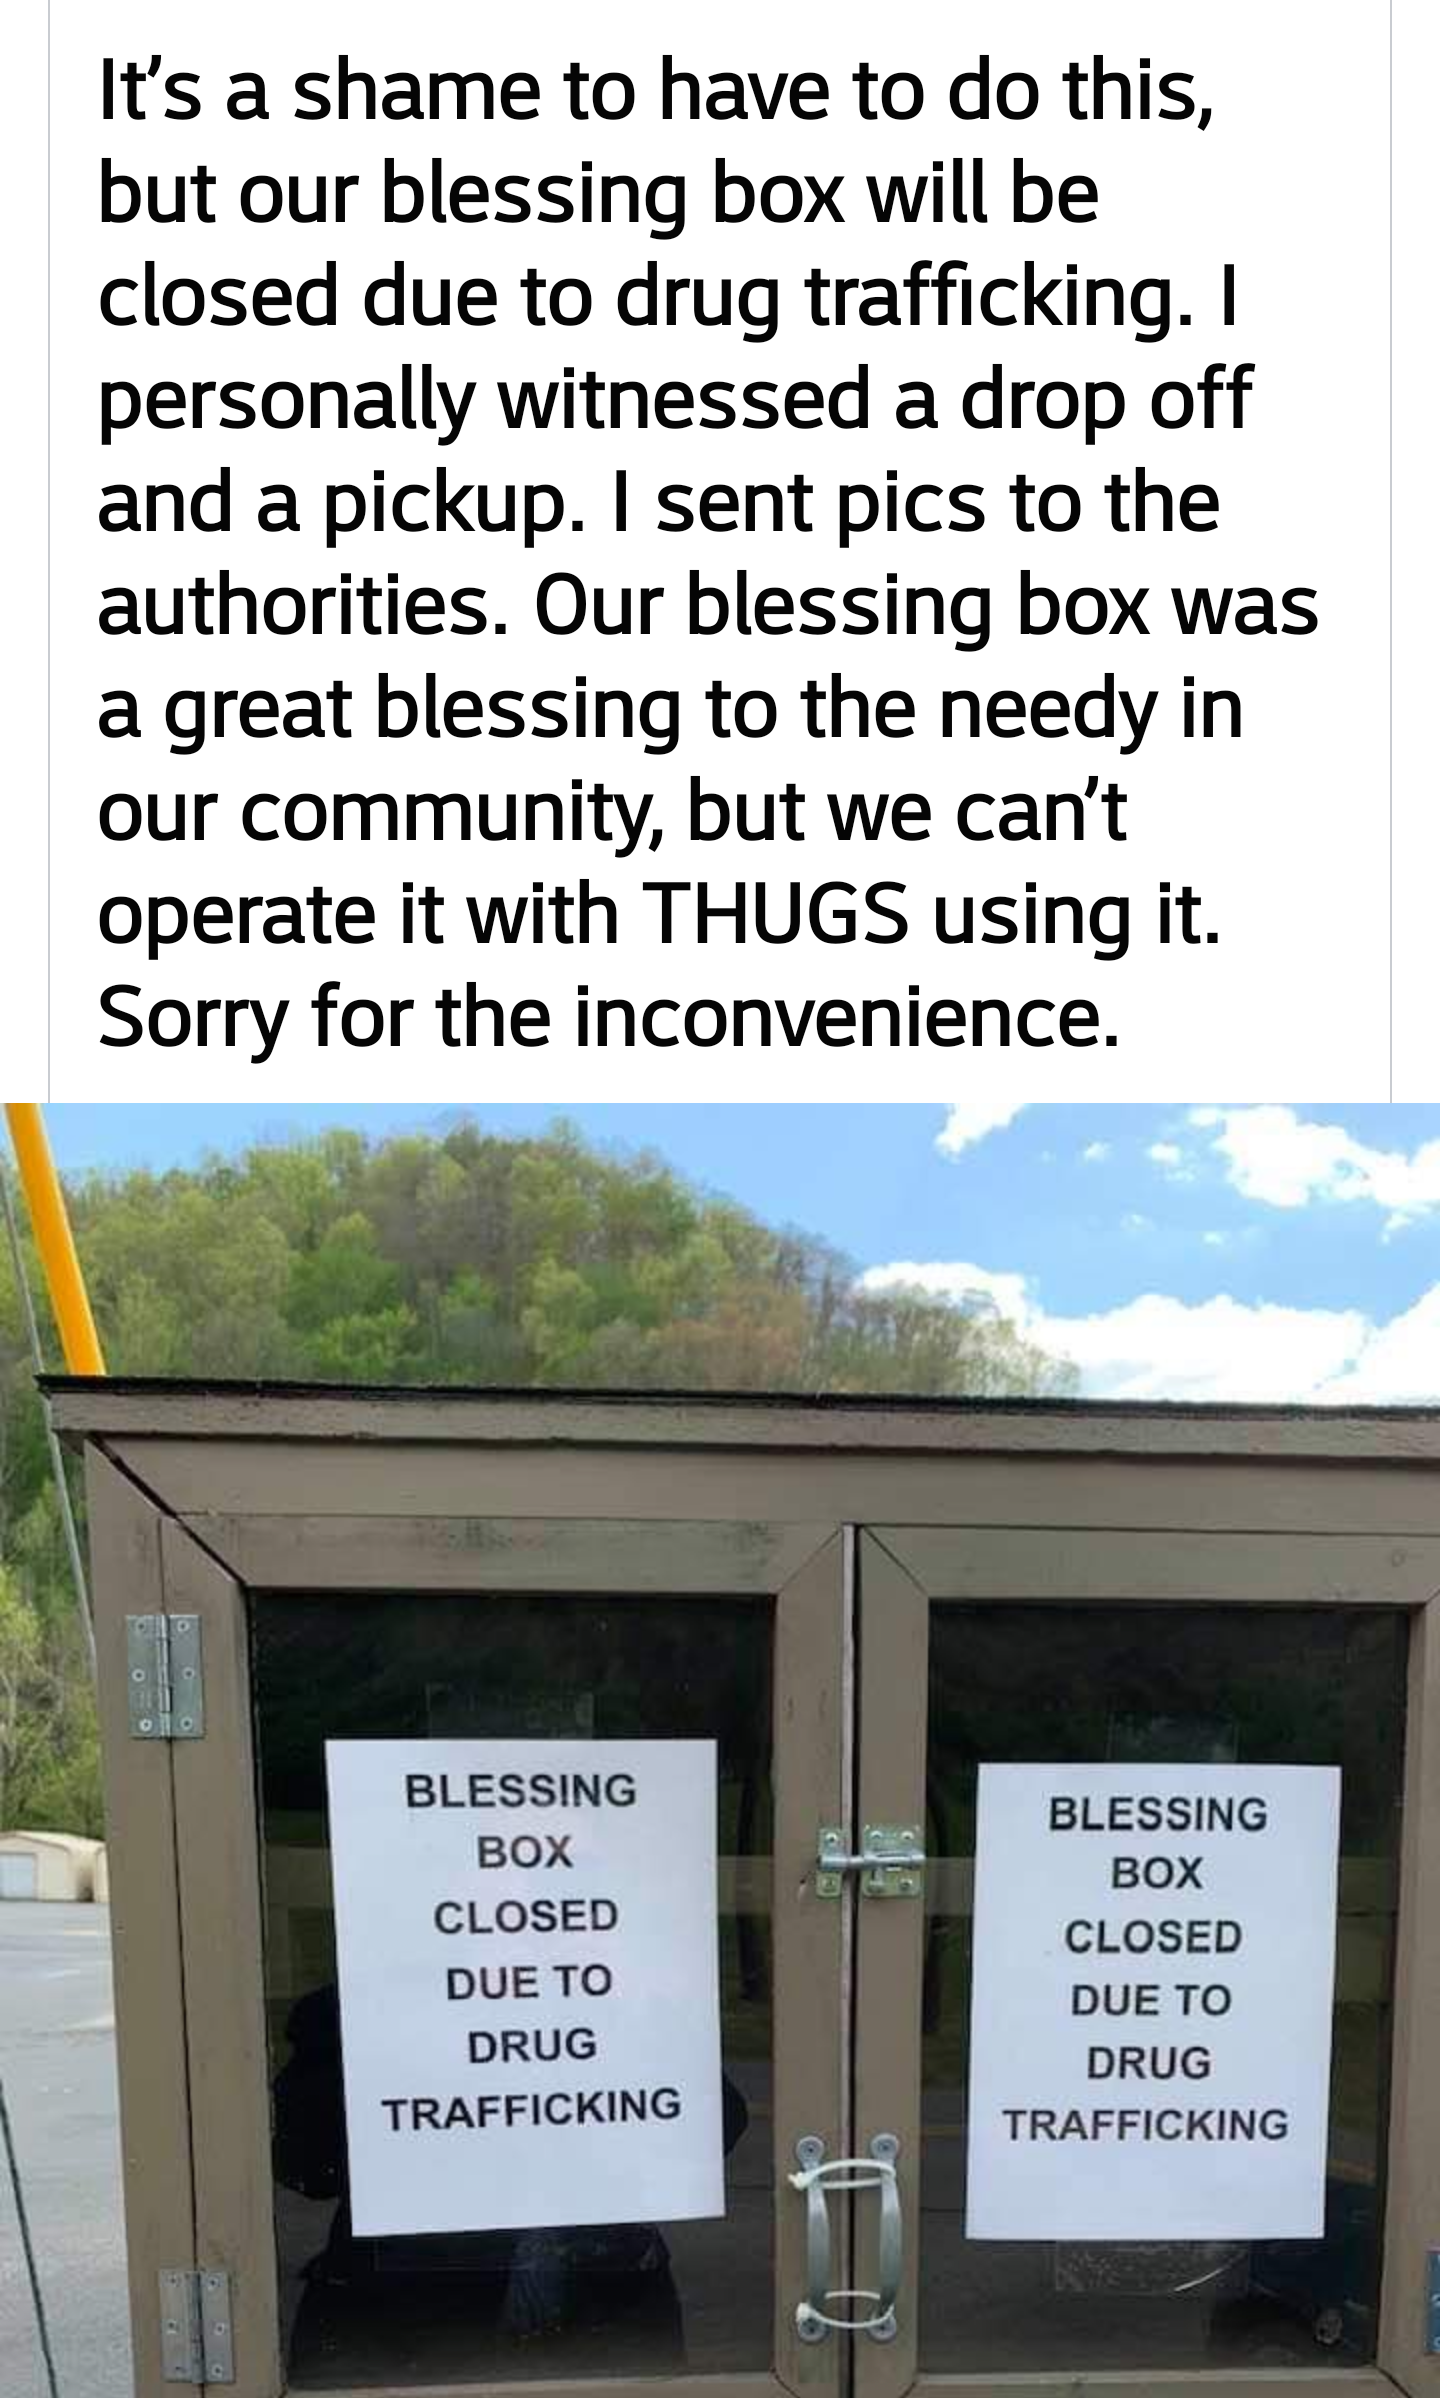 signage - It's a shame to have to do this, but our blessing box will be closed due to drug trafficking. I personally witnessed a drop off and a pickup. I sent pics to the authorities. Our blessing box was a great blessing to the needy in our community, bu